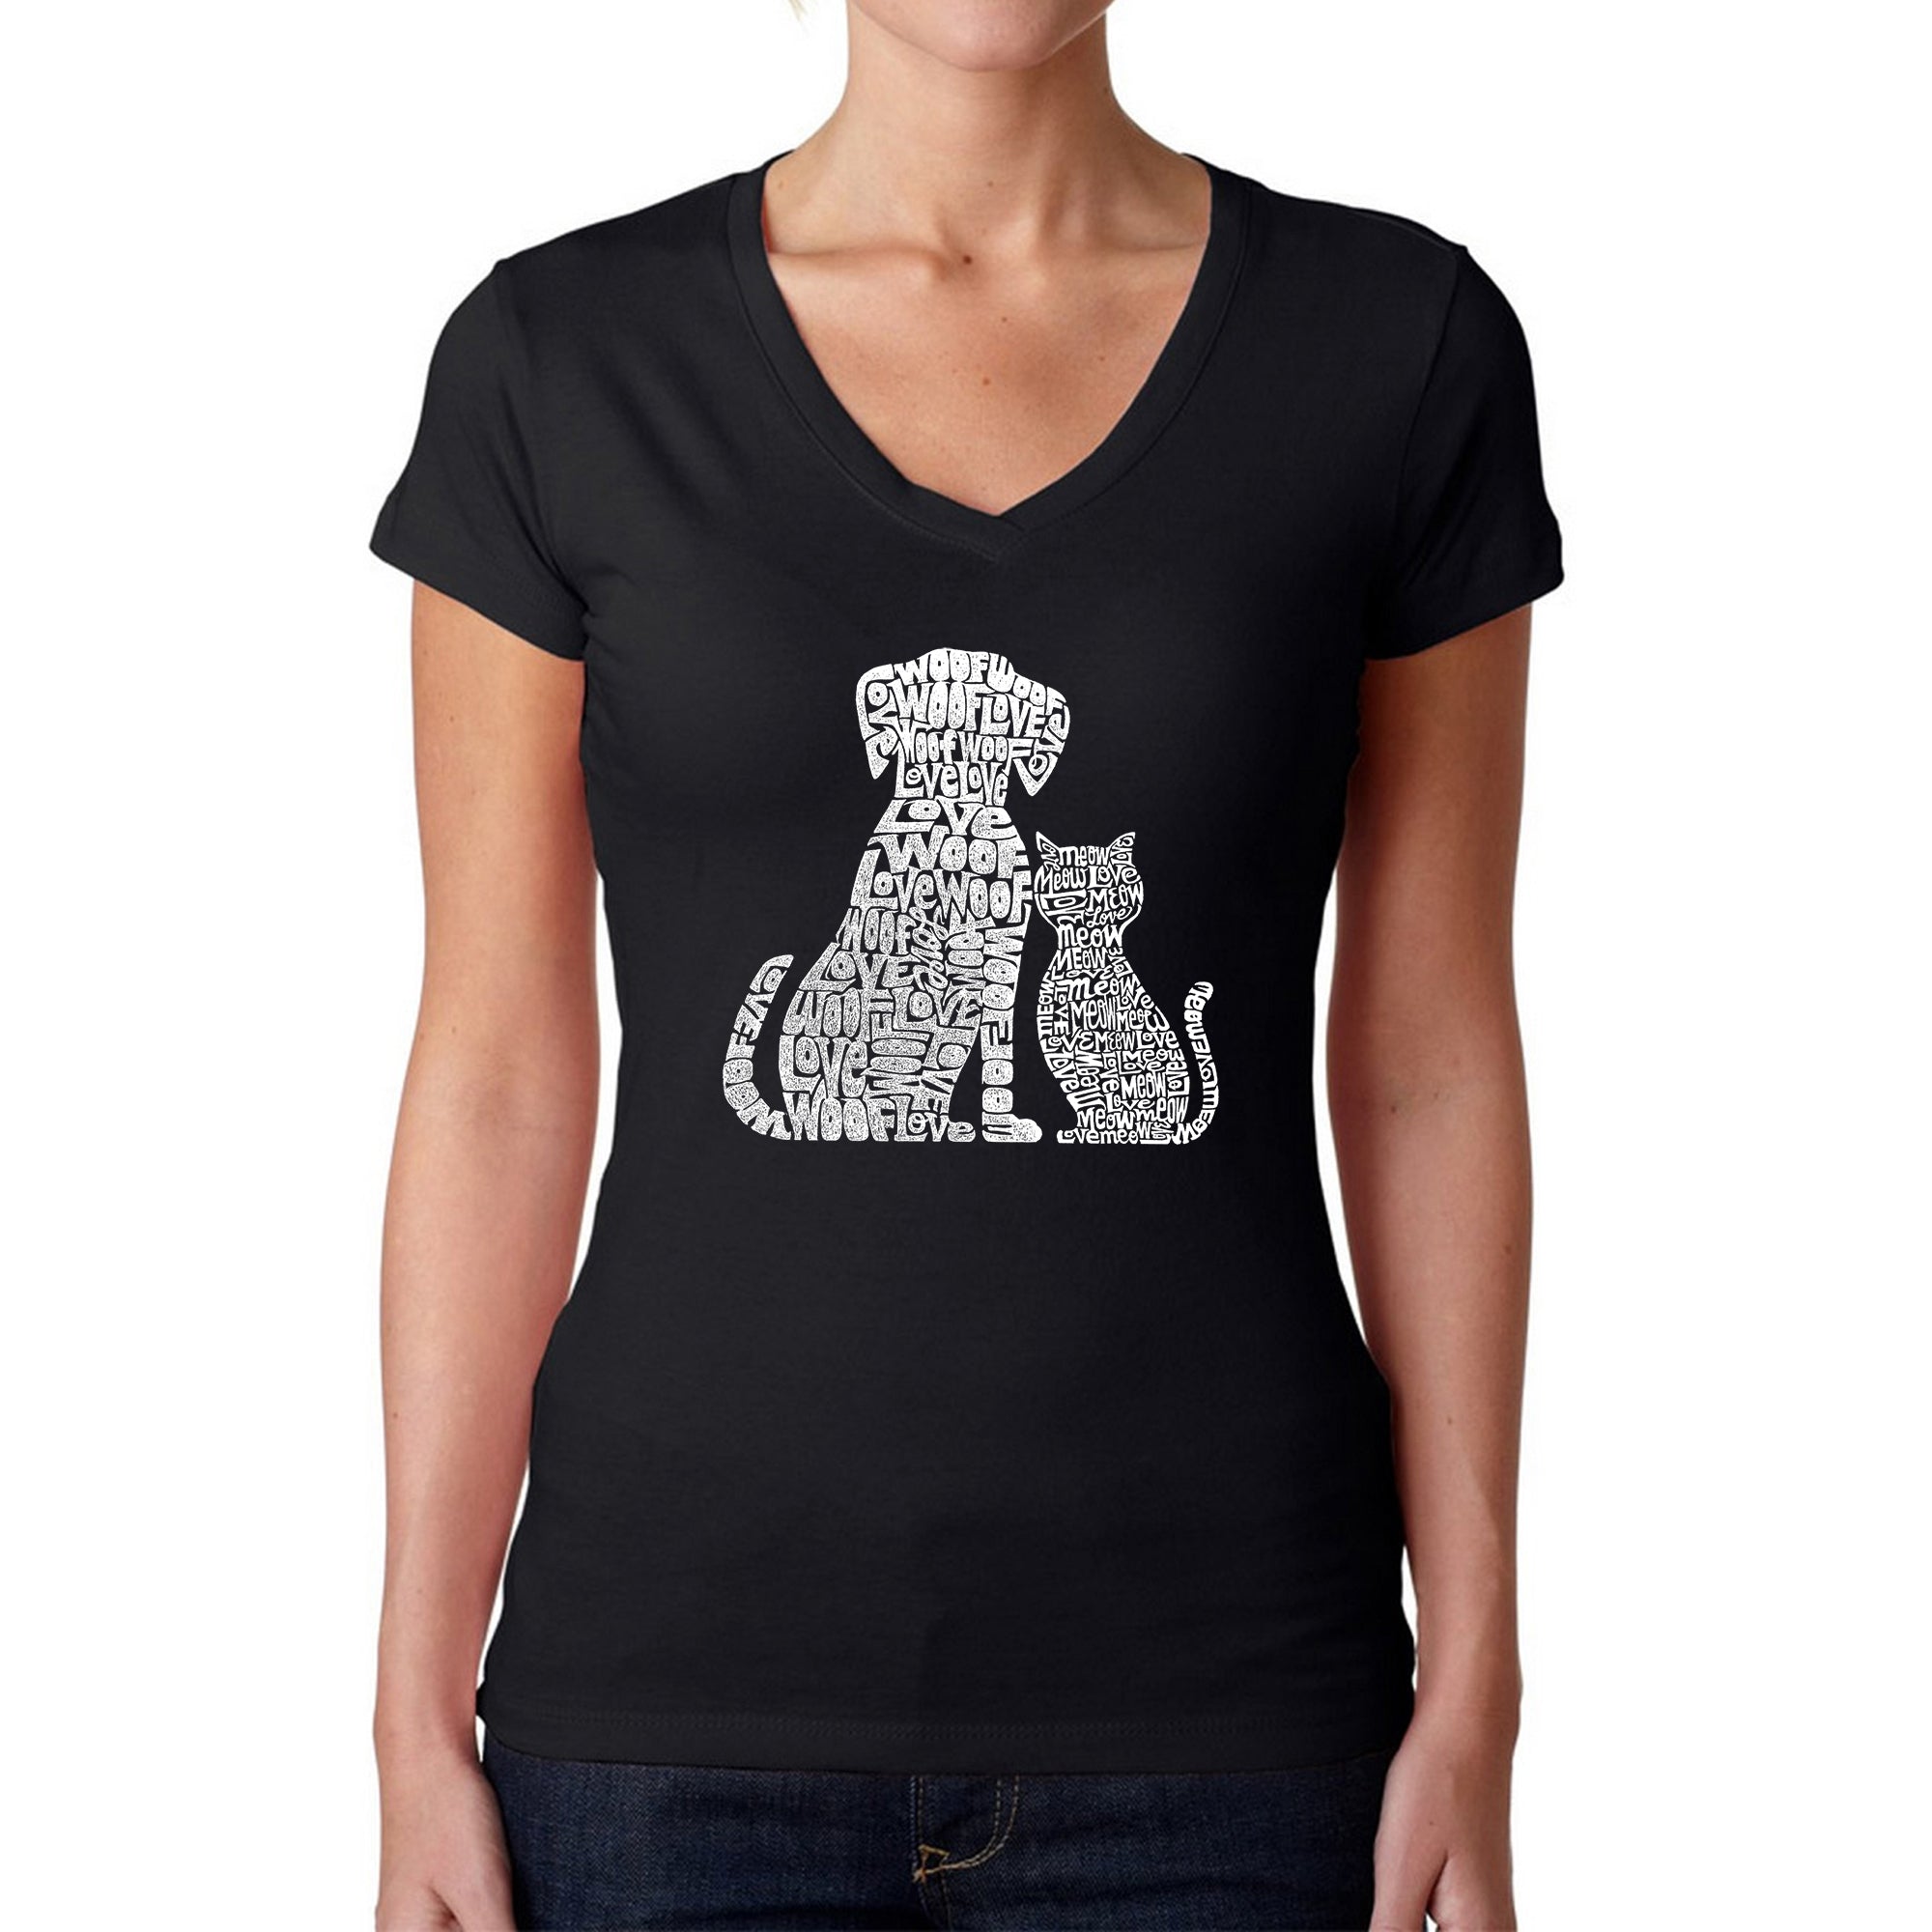 Dogs And Cats - Women's Word Art V-Neck T-Shirt - XX-Large